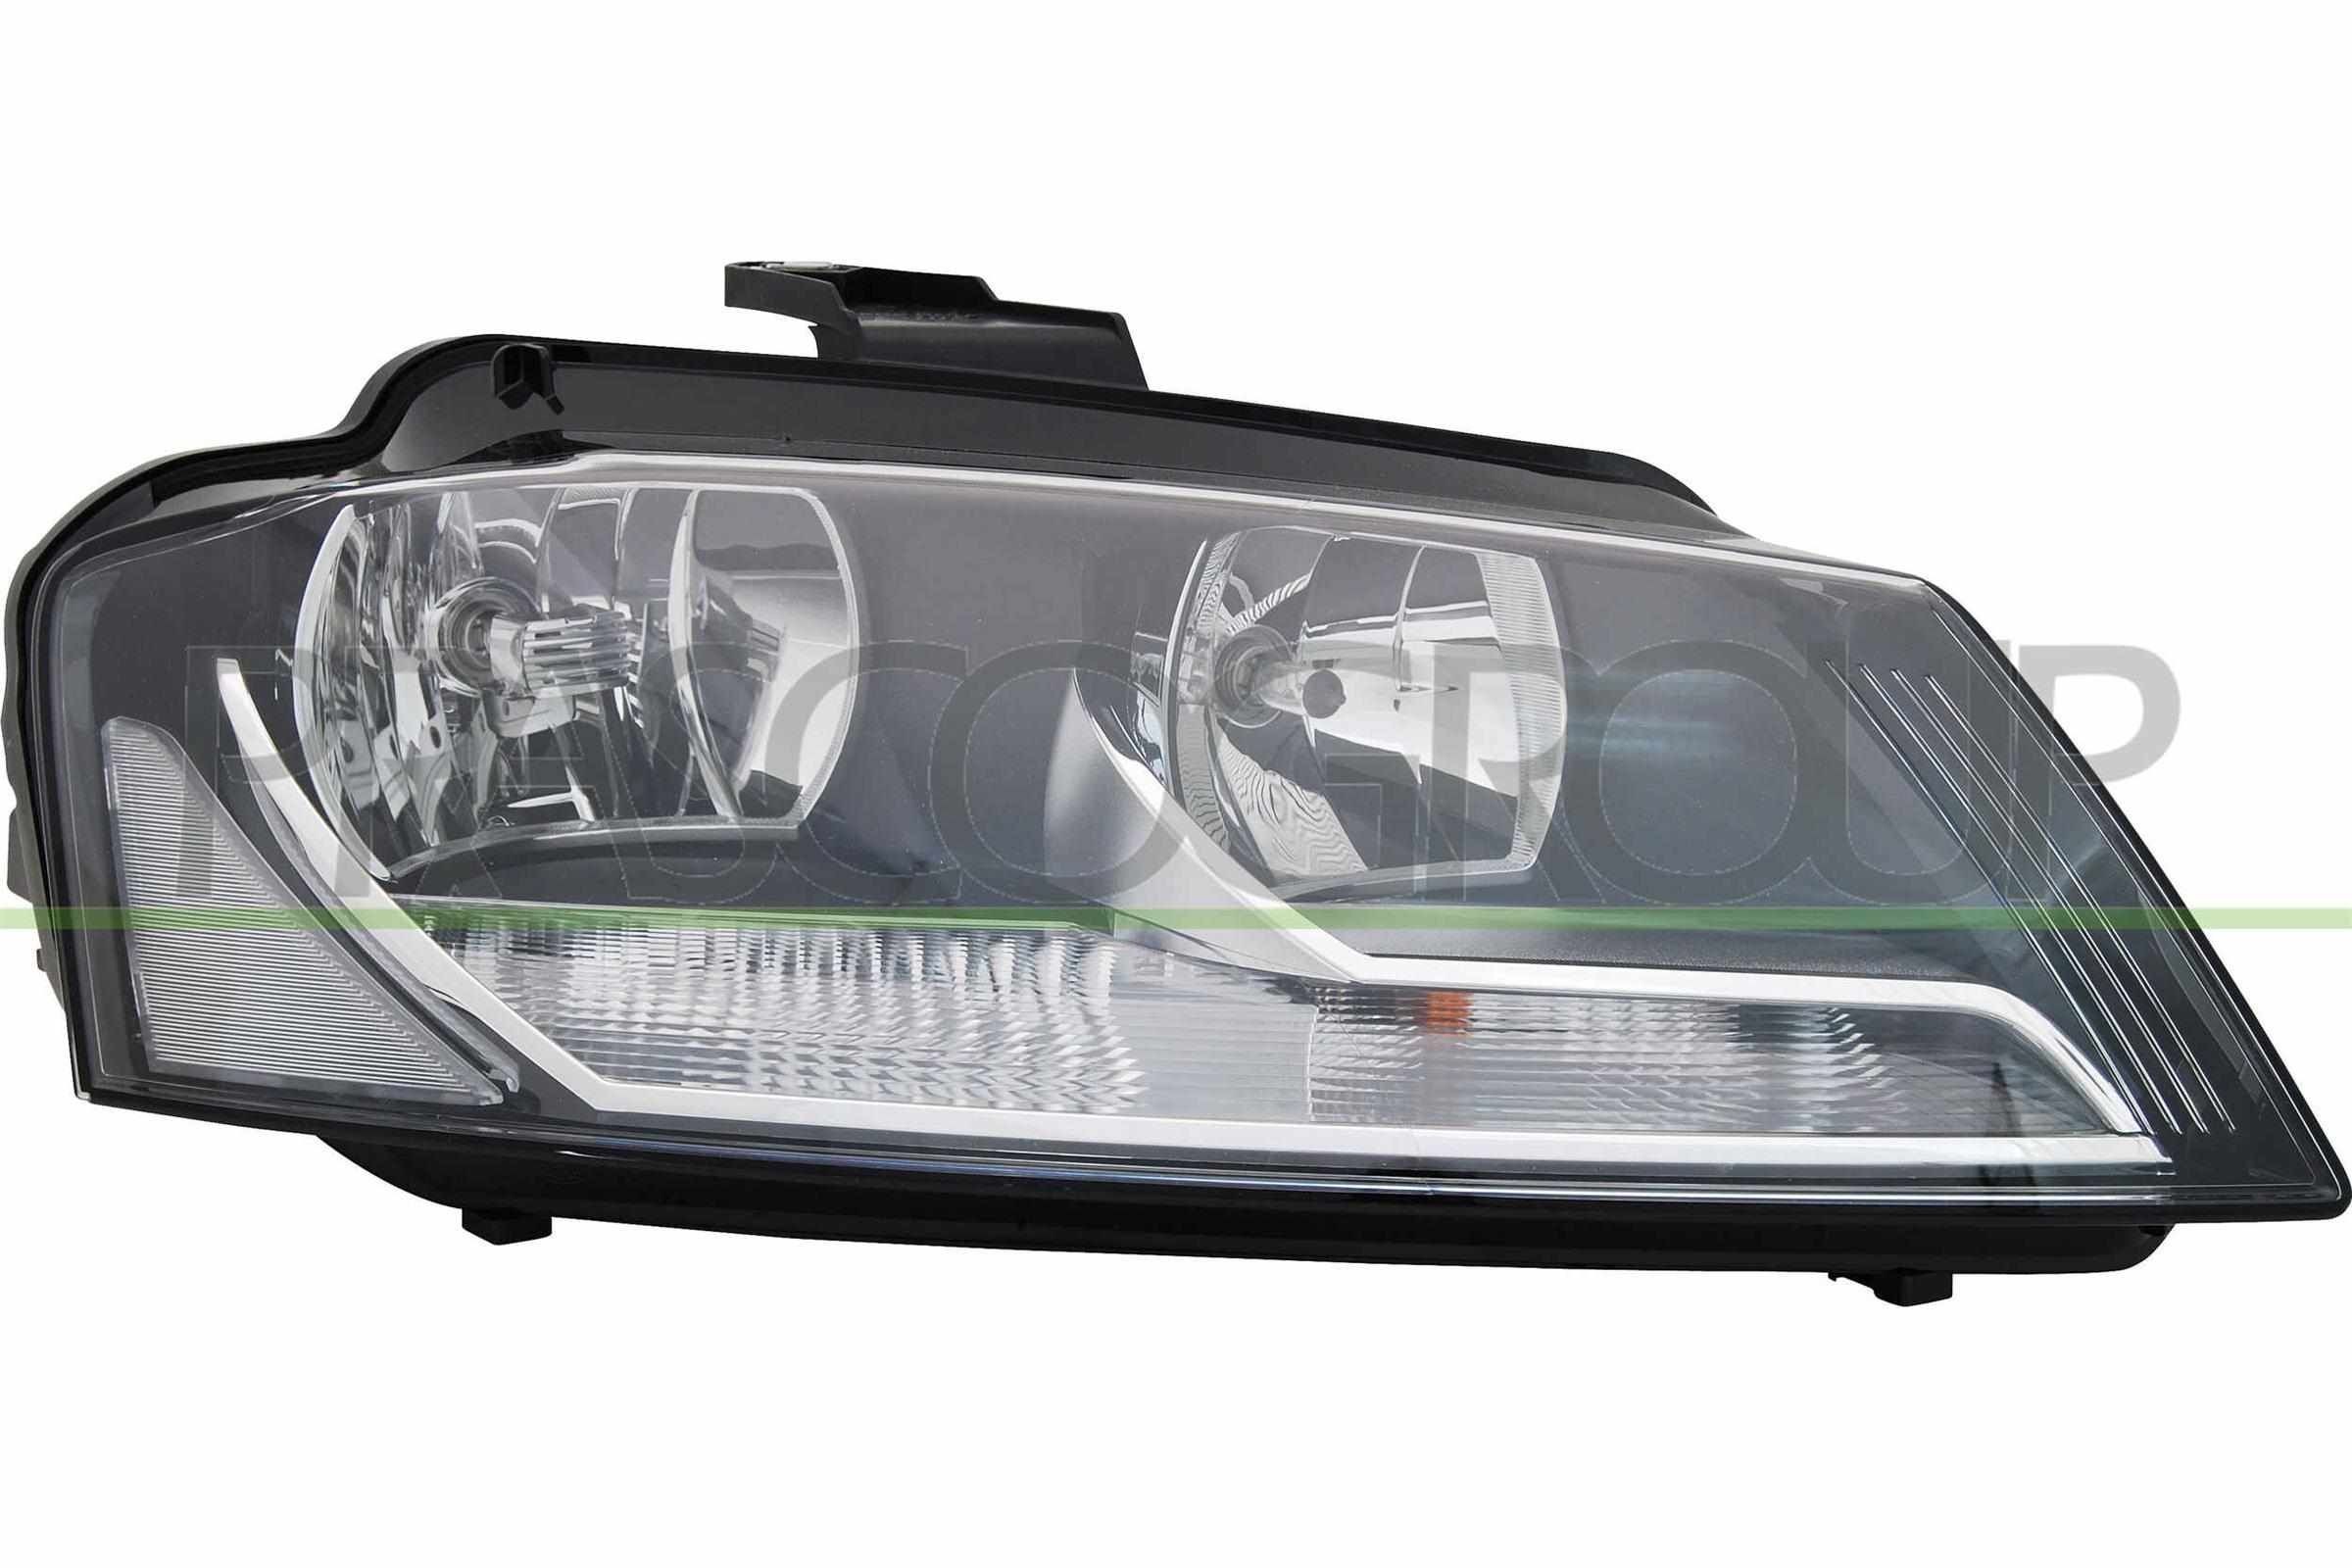 AD3224904 PRASCO Headlight SAAB Left, H7/H7, with daytime running light, with motor for headlamp levelling